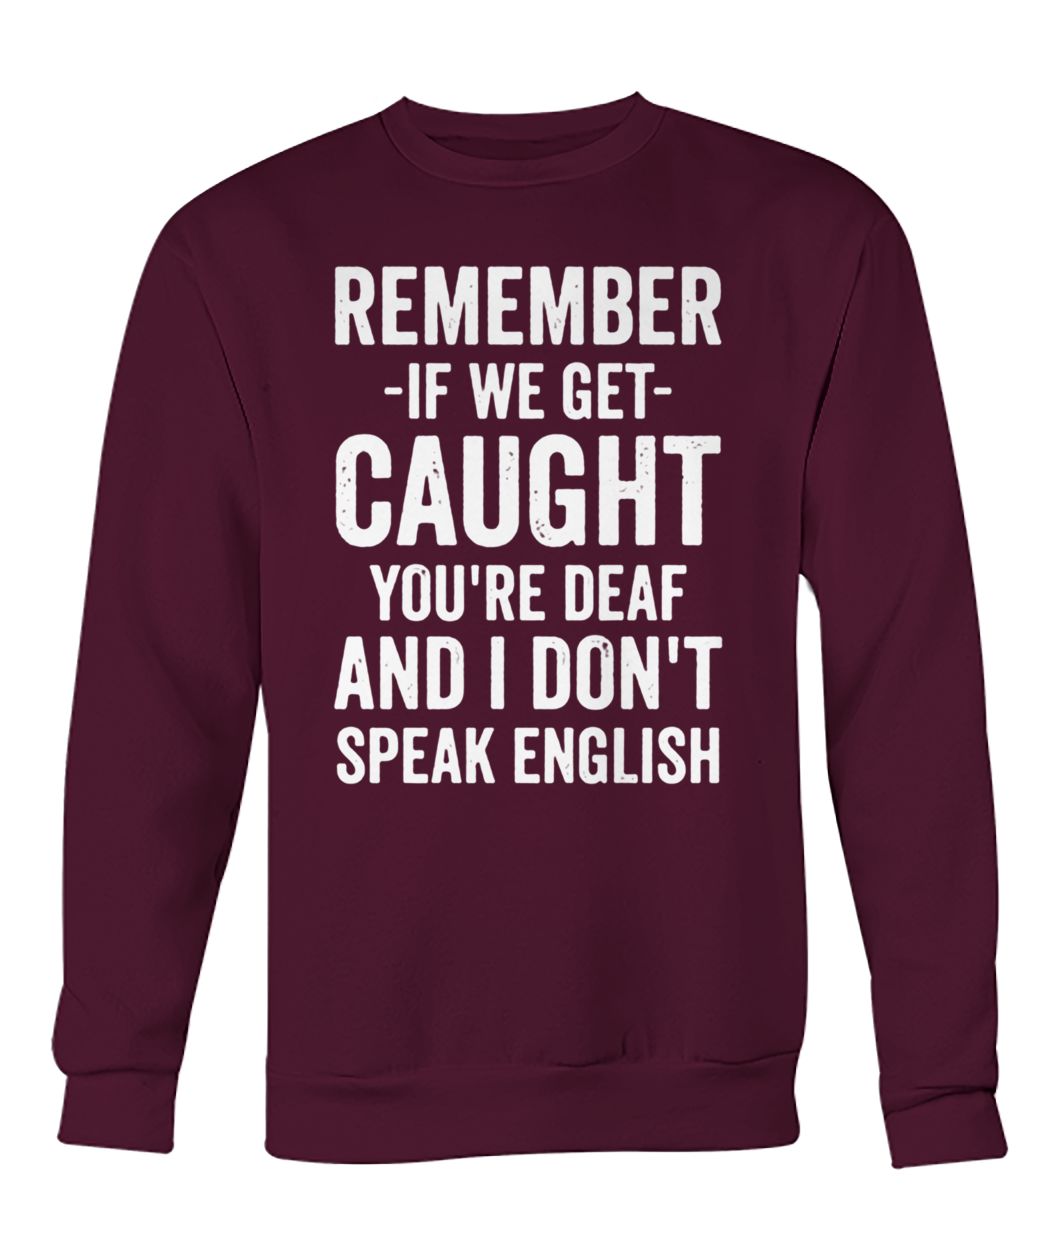 Remember if we get caught you're deaf and I don't speak english crew neck sweatshirt